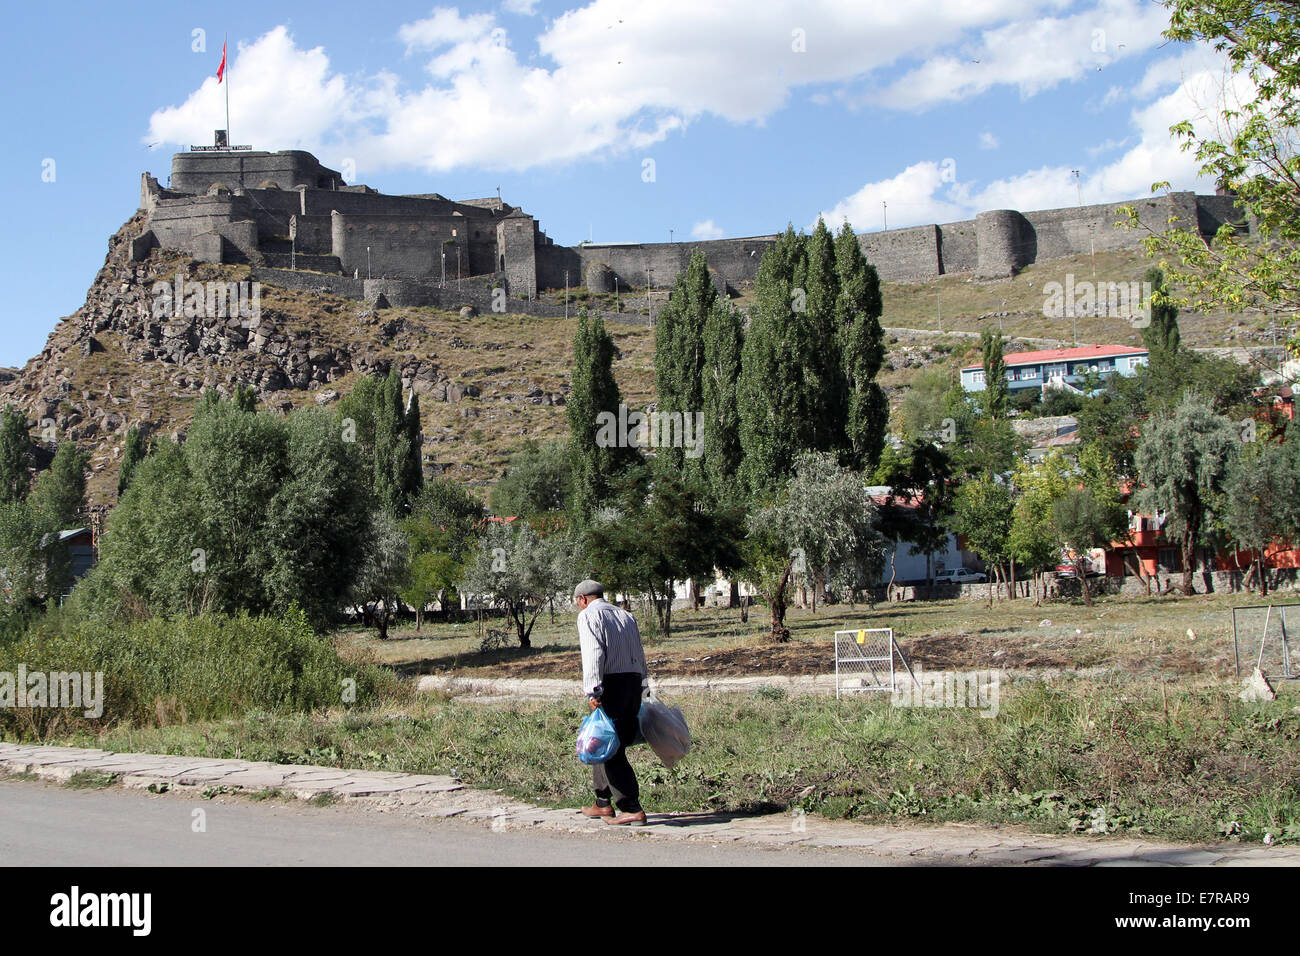 A man walks past Kars Fortress, which overlooks the town of Kars, in eastern Turkey. Stock Photo